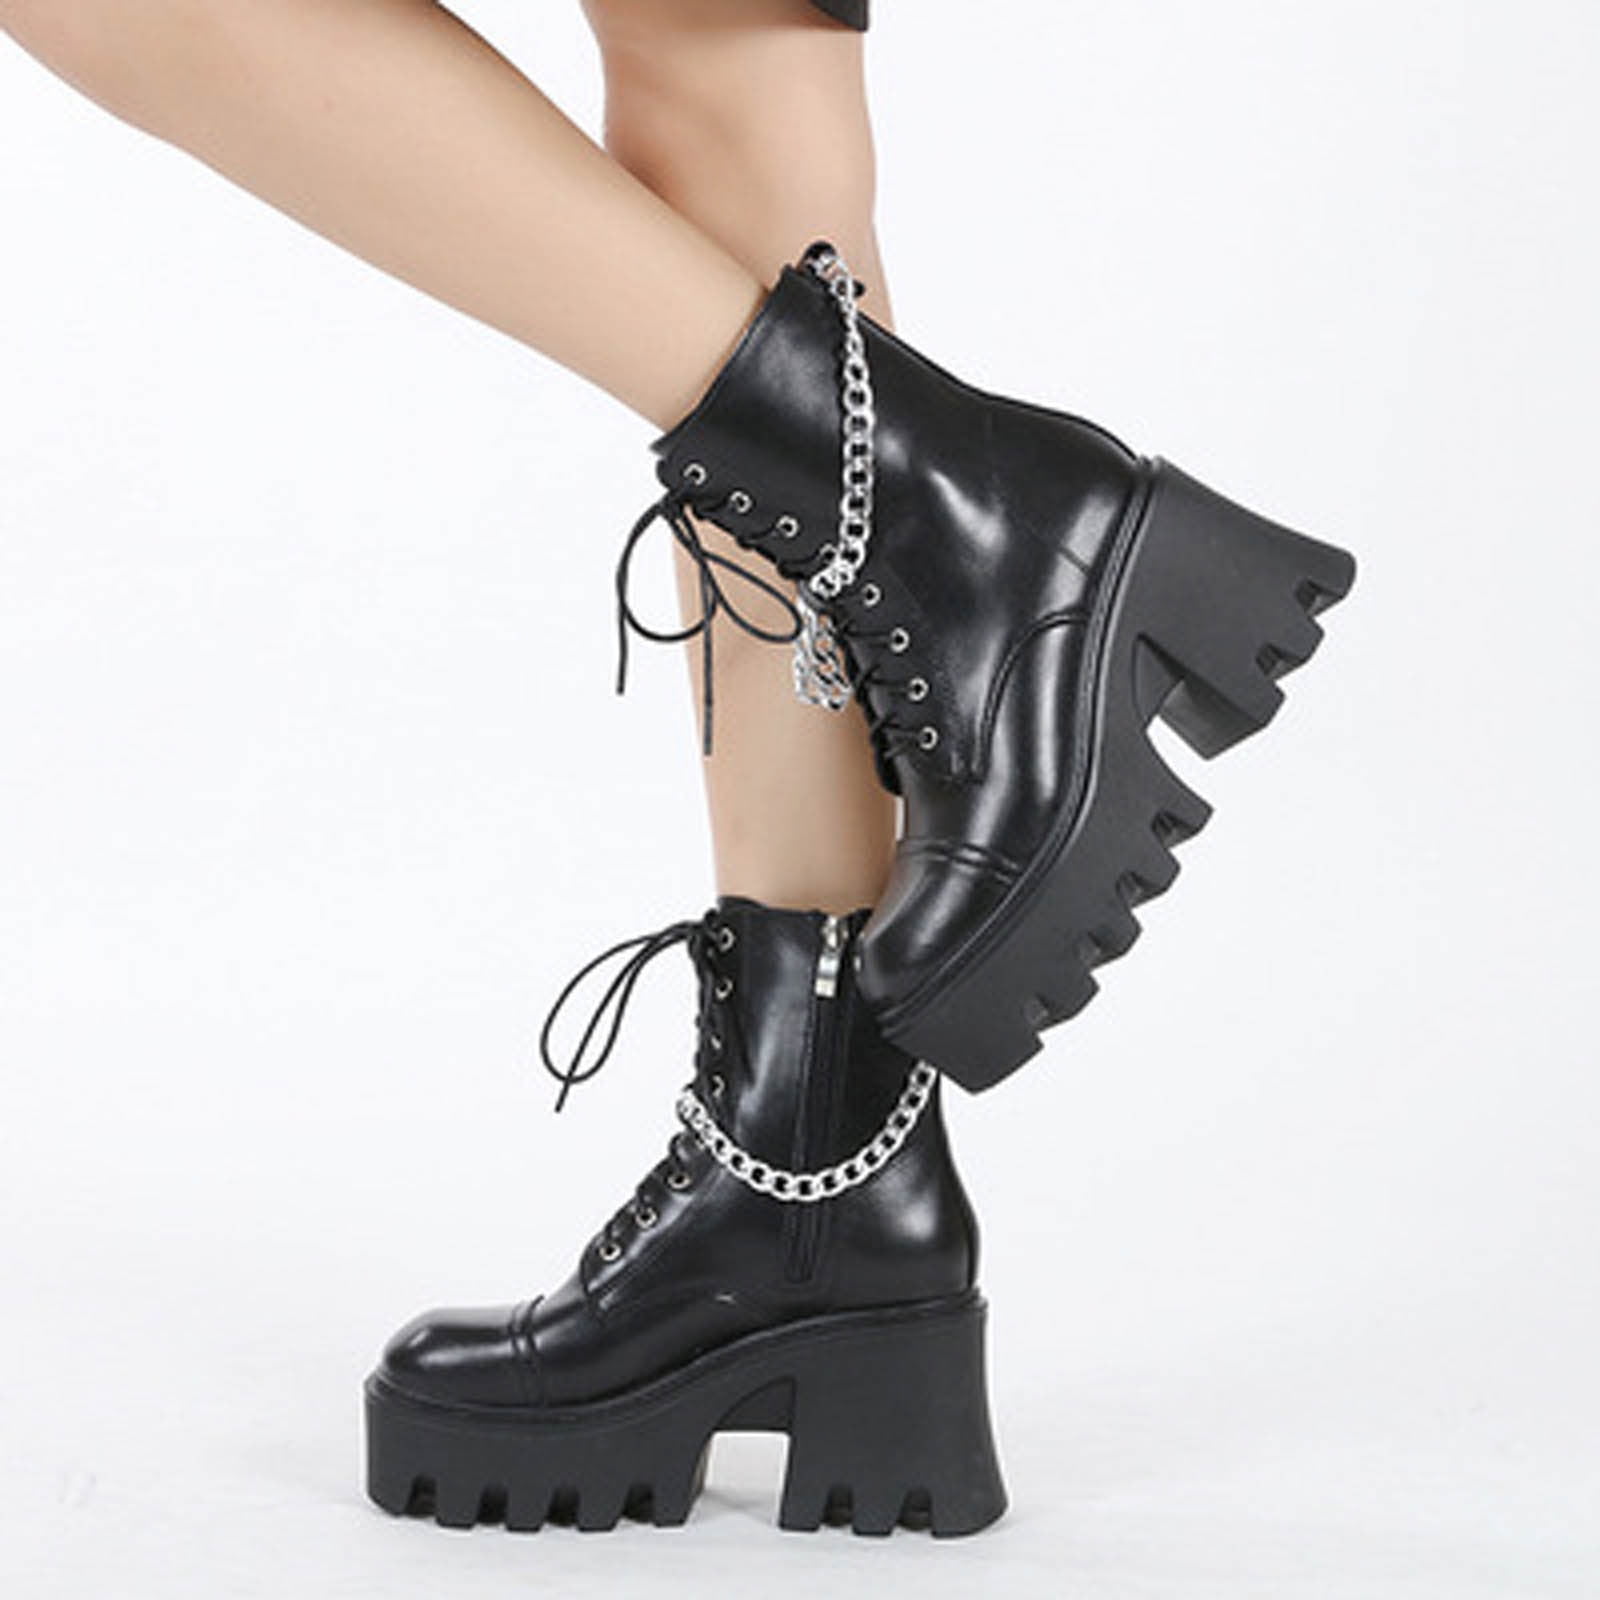 Womens Studded Boots Ladies Goth Punk Rider Zip Mid Calf Lace Up Mid Calf Shoes 